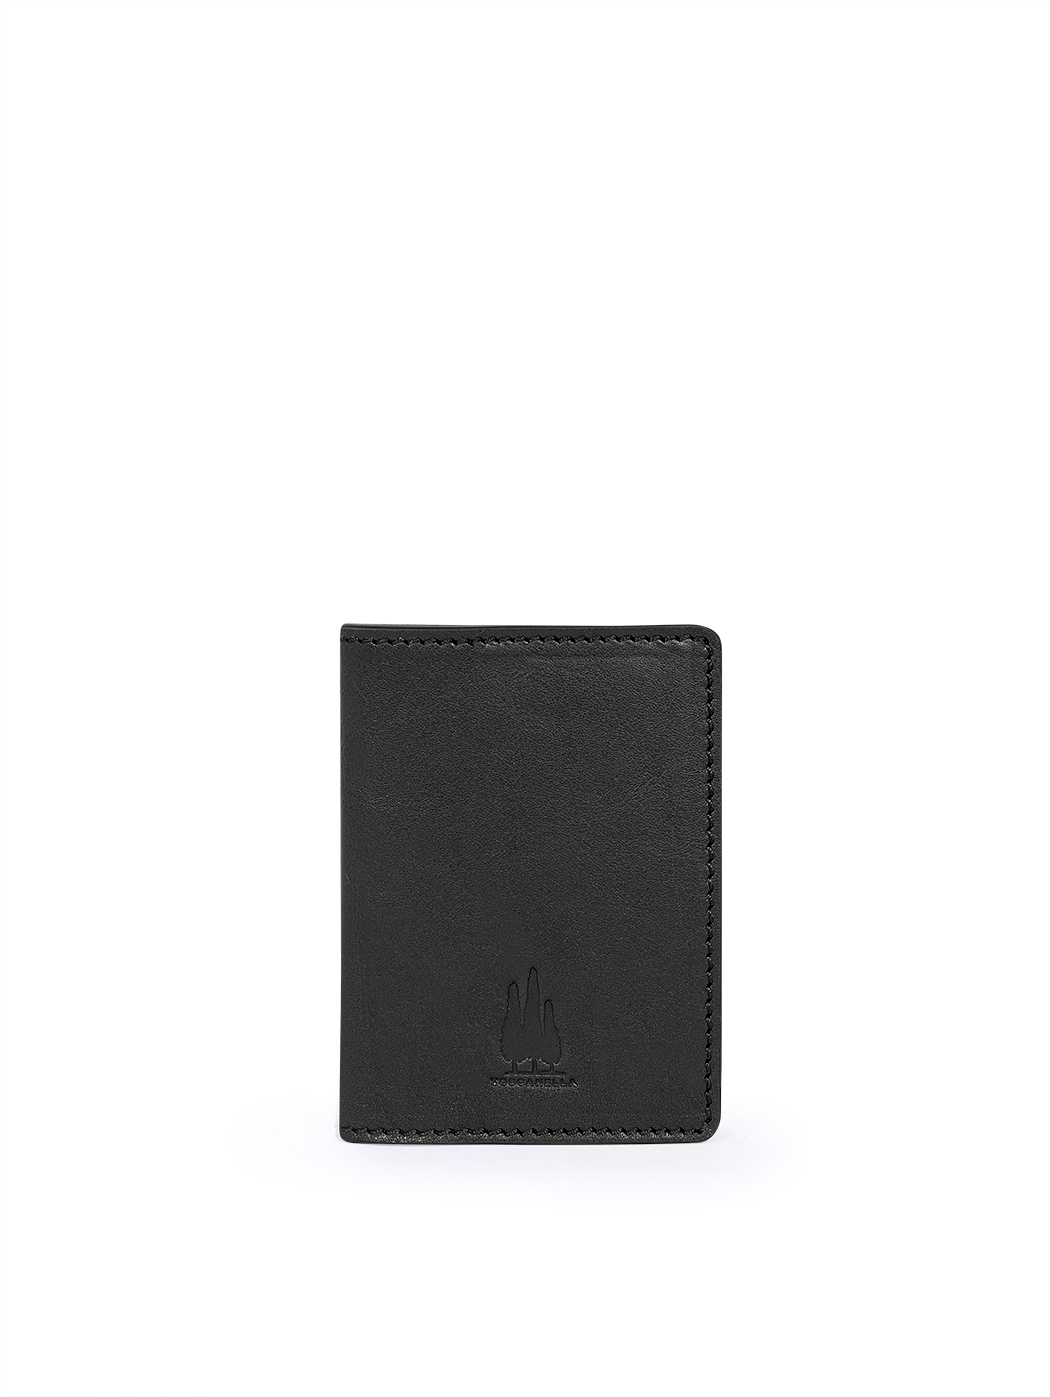 Business Card Holder in Leather Black